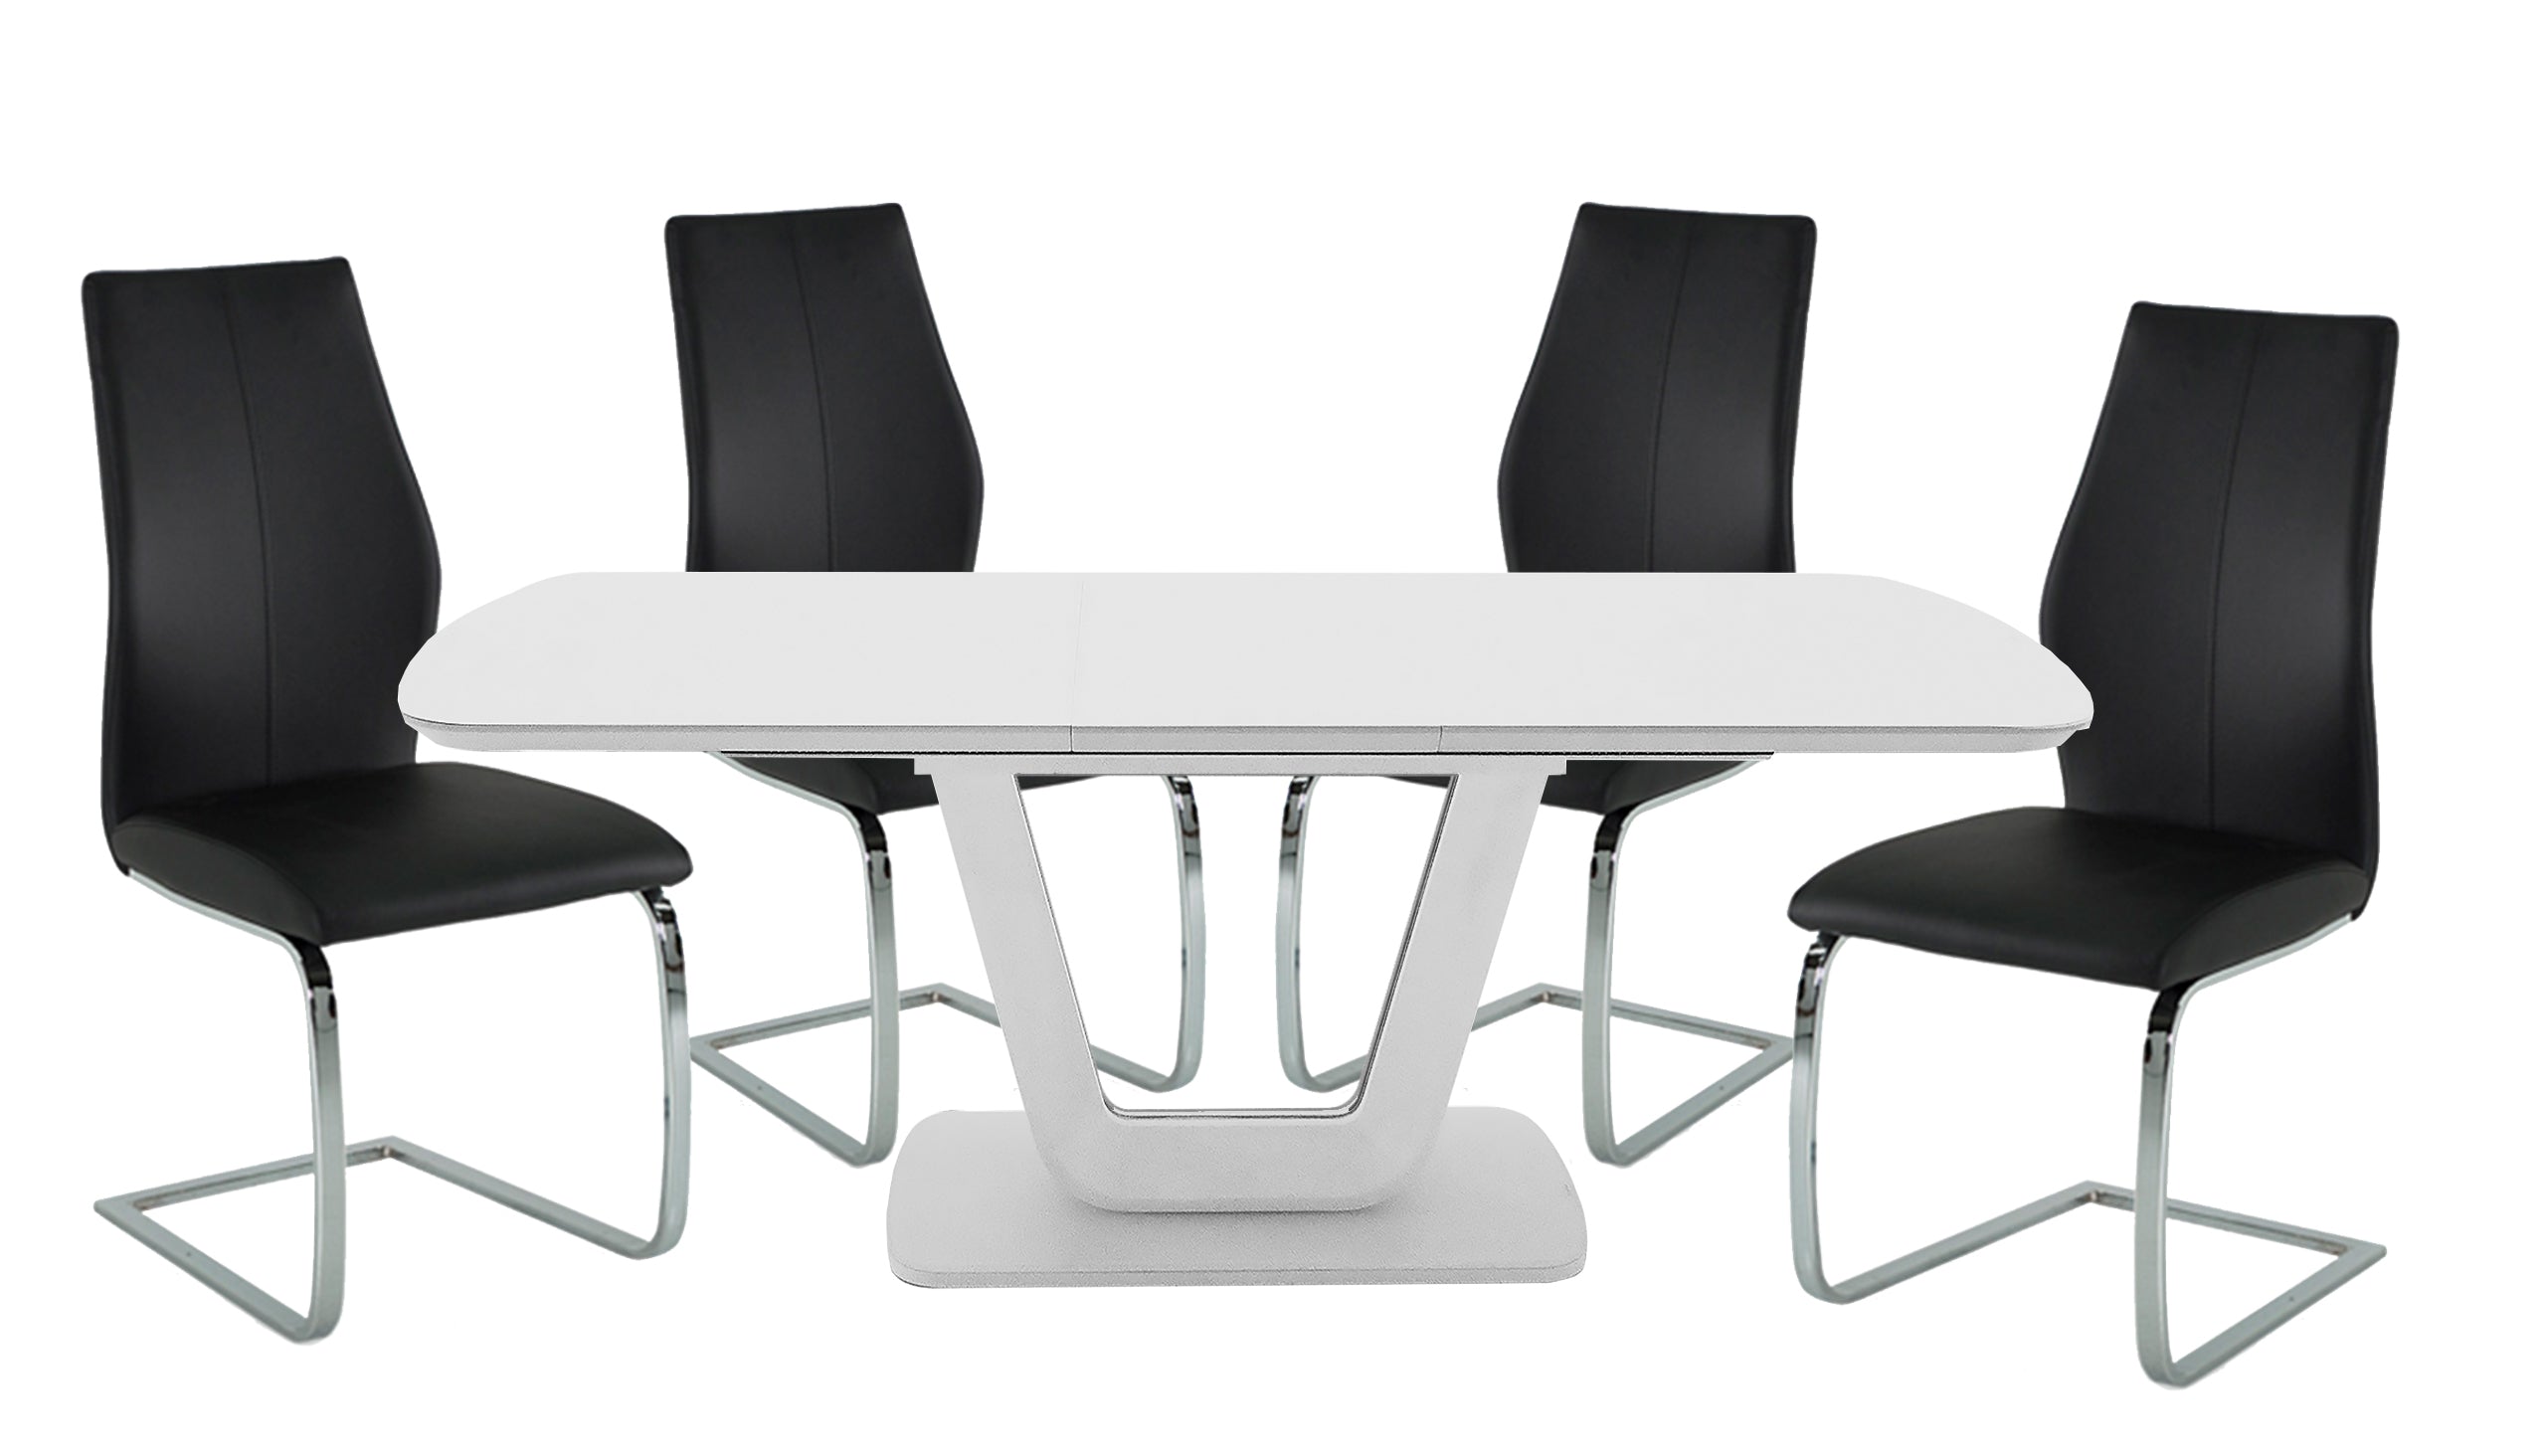 Stockholm 1.2m Extending Dining Table in White with 4 Chairs with Stainless Steel Legs